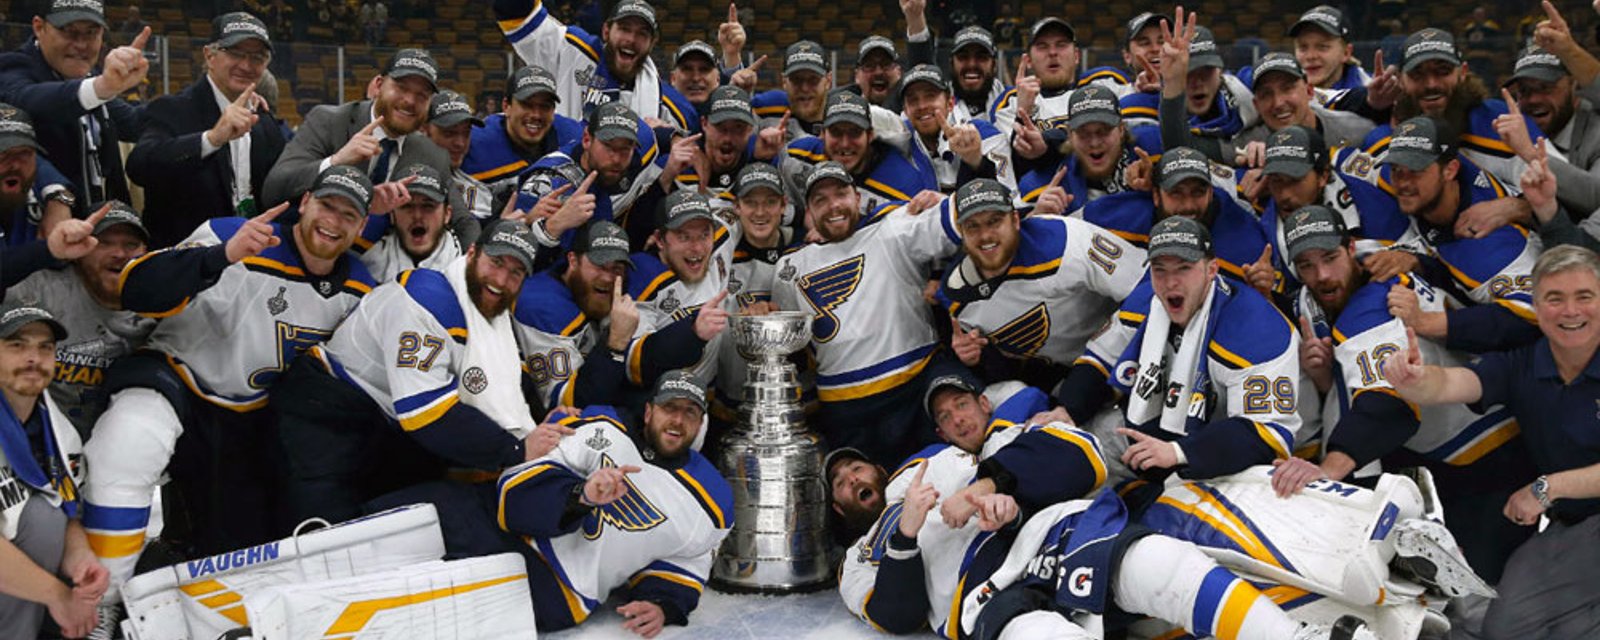 Report: Blues at risk of losing playoff hero over contract squabble